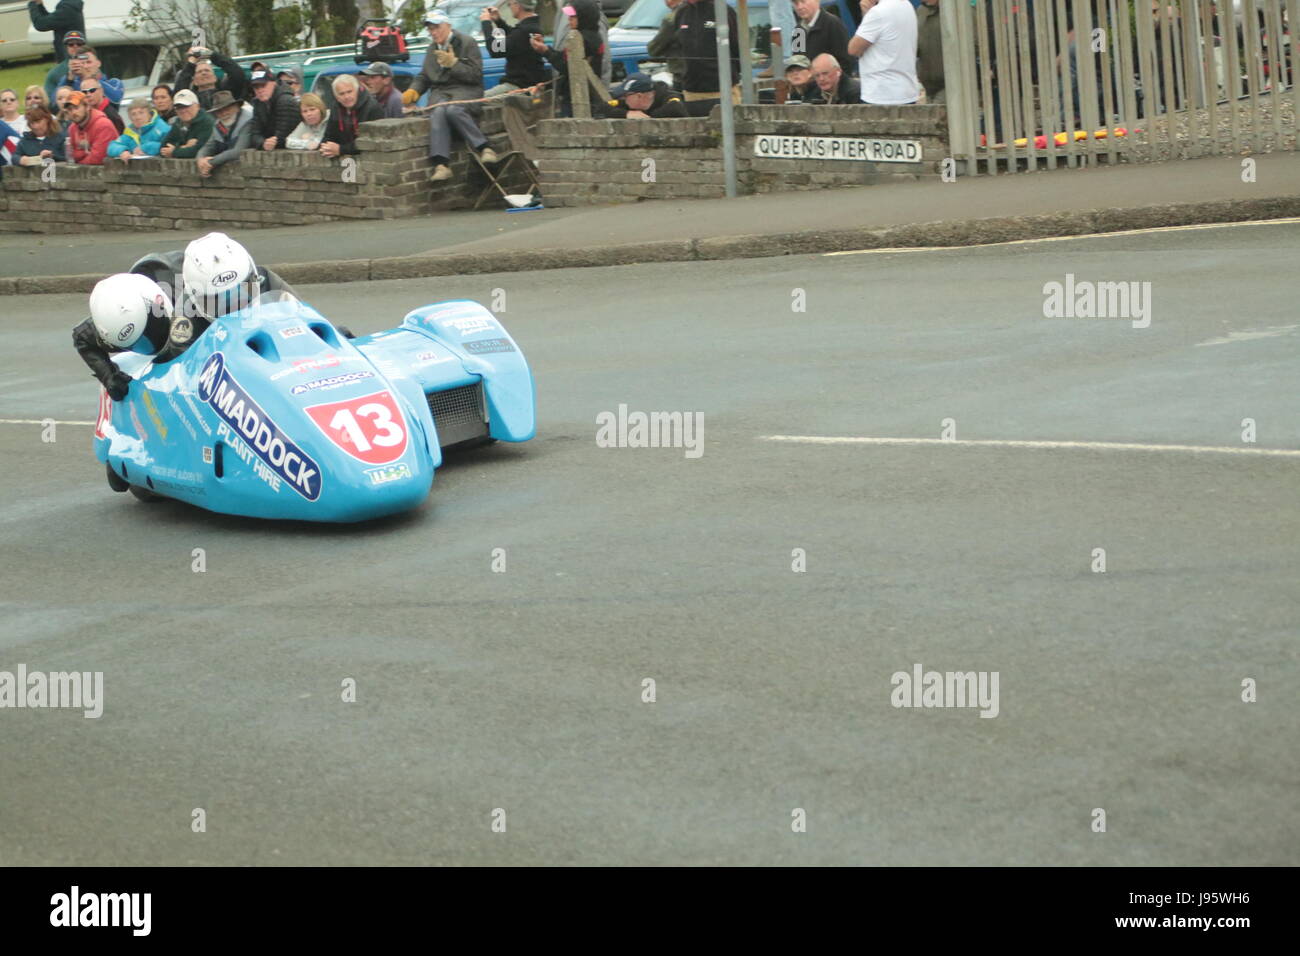 Ramsey, UK. 5th Jun, 2017. Isle of Man TT Races, Sure Sidecar Race. Number 13 Robert Handcock and Ken Edwards from the Maddockhire/Portable Energy Team of forest of Dean on a 600cc Baker Honda sidecar at Cruickshanks Corner, Ramsey, Isle of Man. Credit: Louisa Jane Bawden/Alamy Live News. Stock Photo